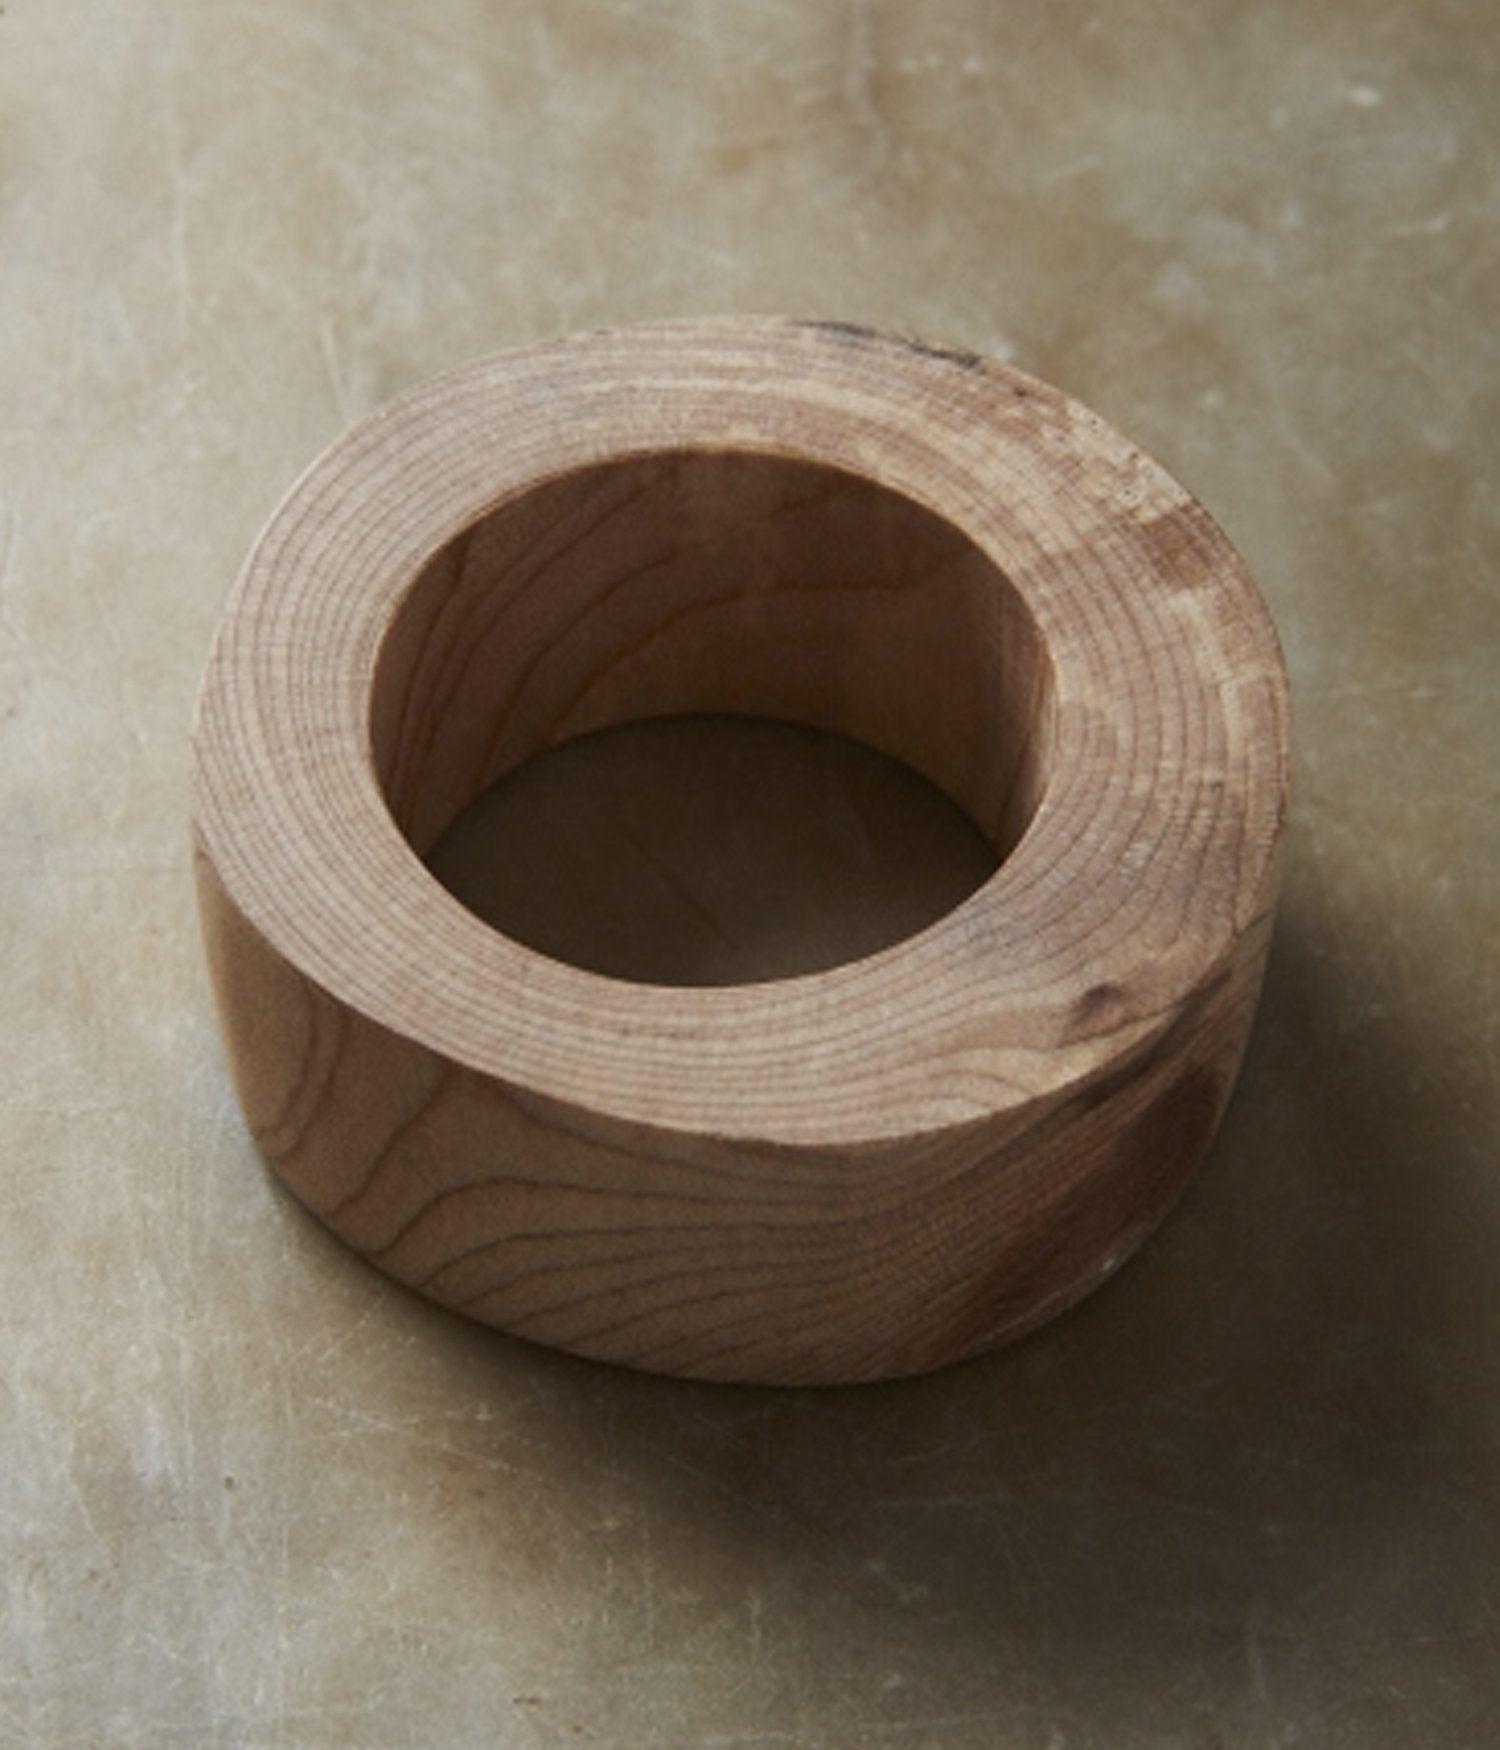 Tapered Wood Napkin Ring - The Event Rental Co.